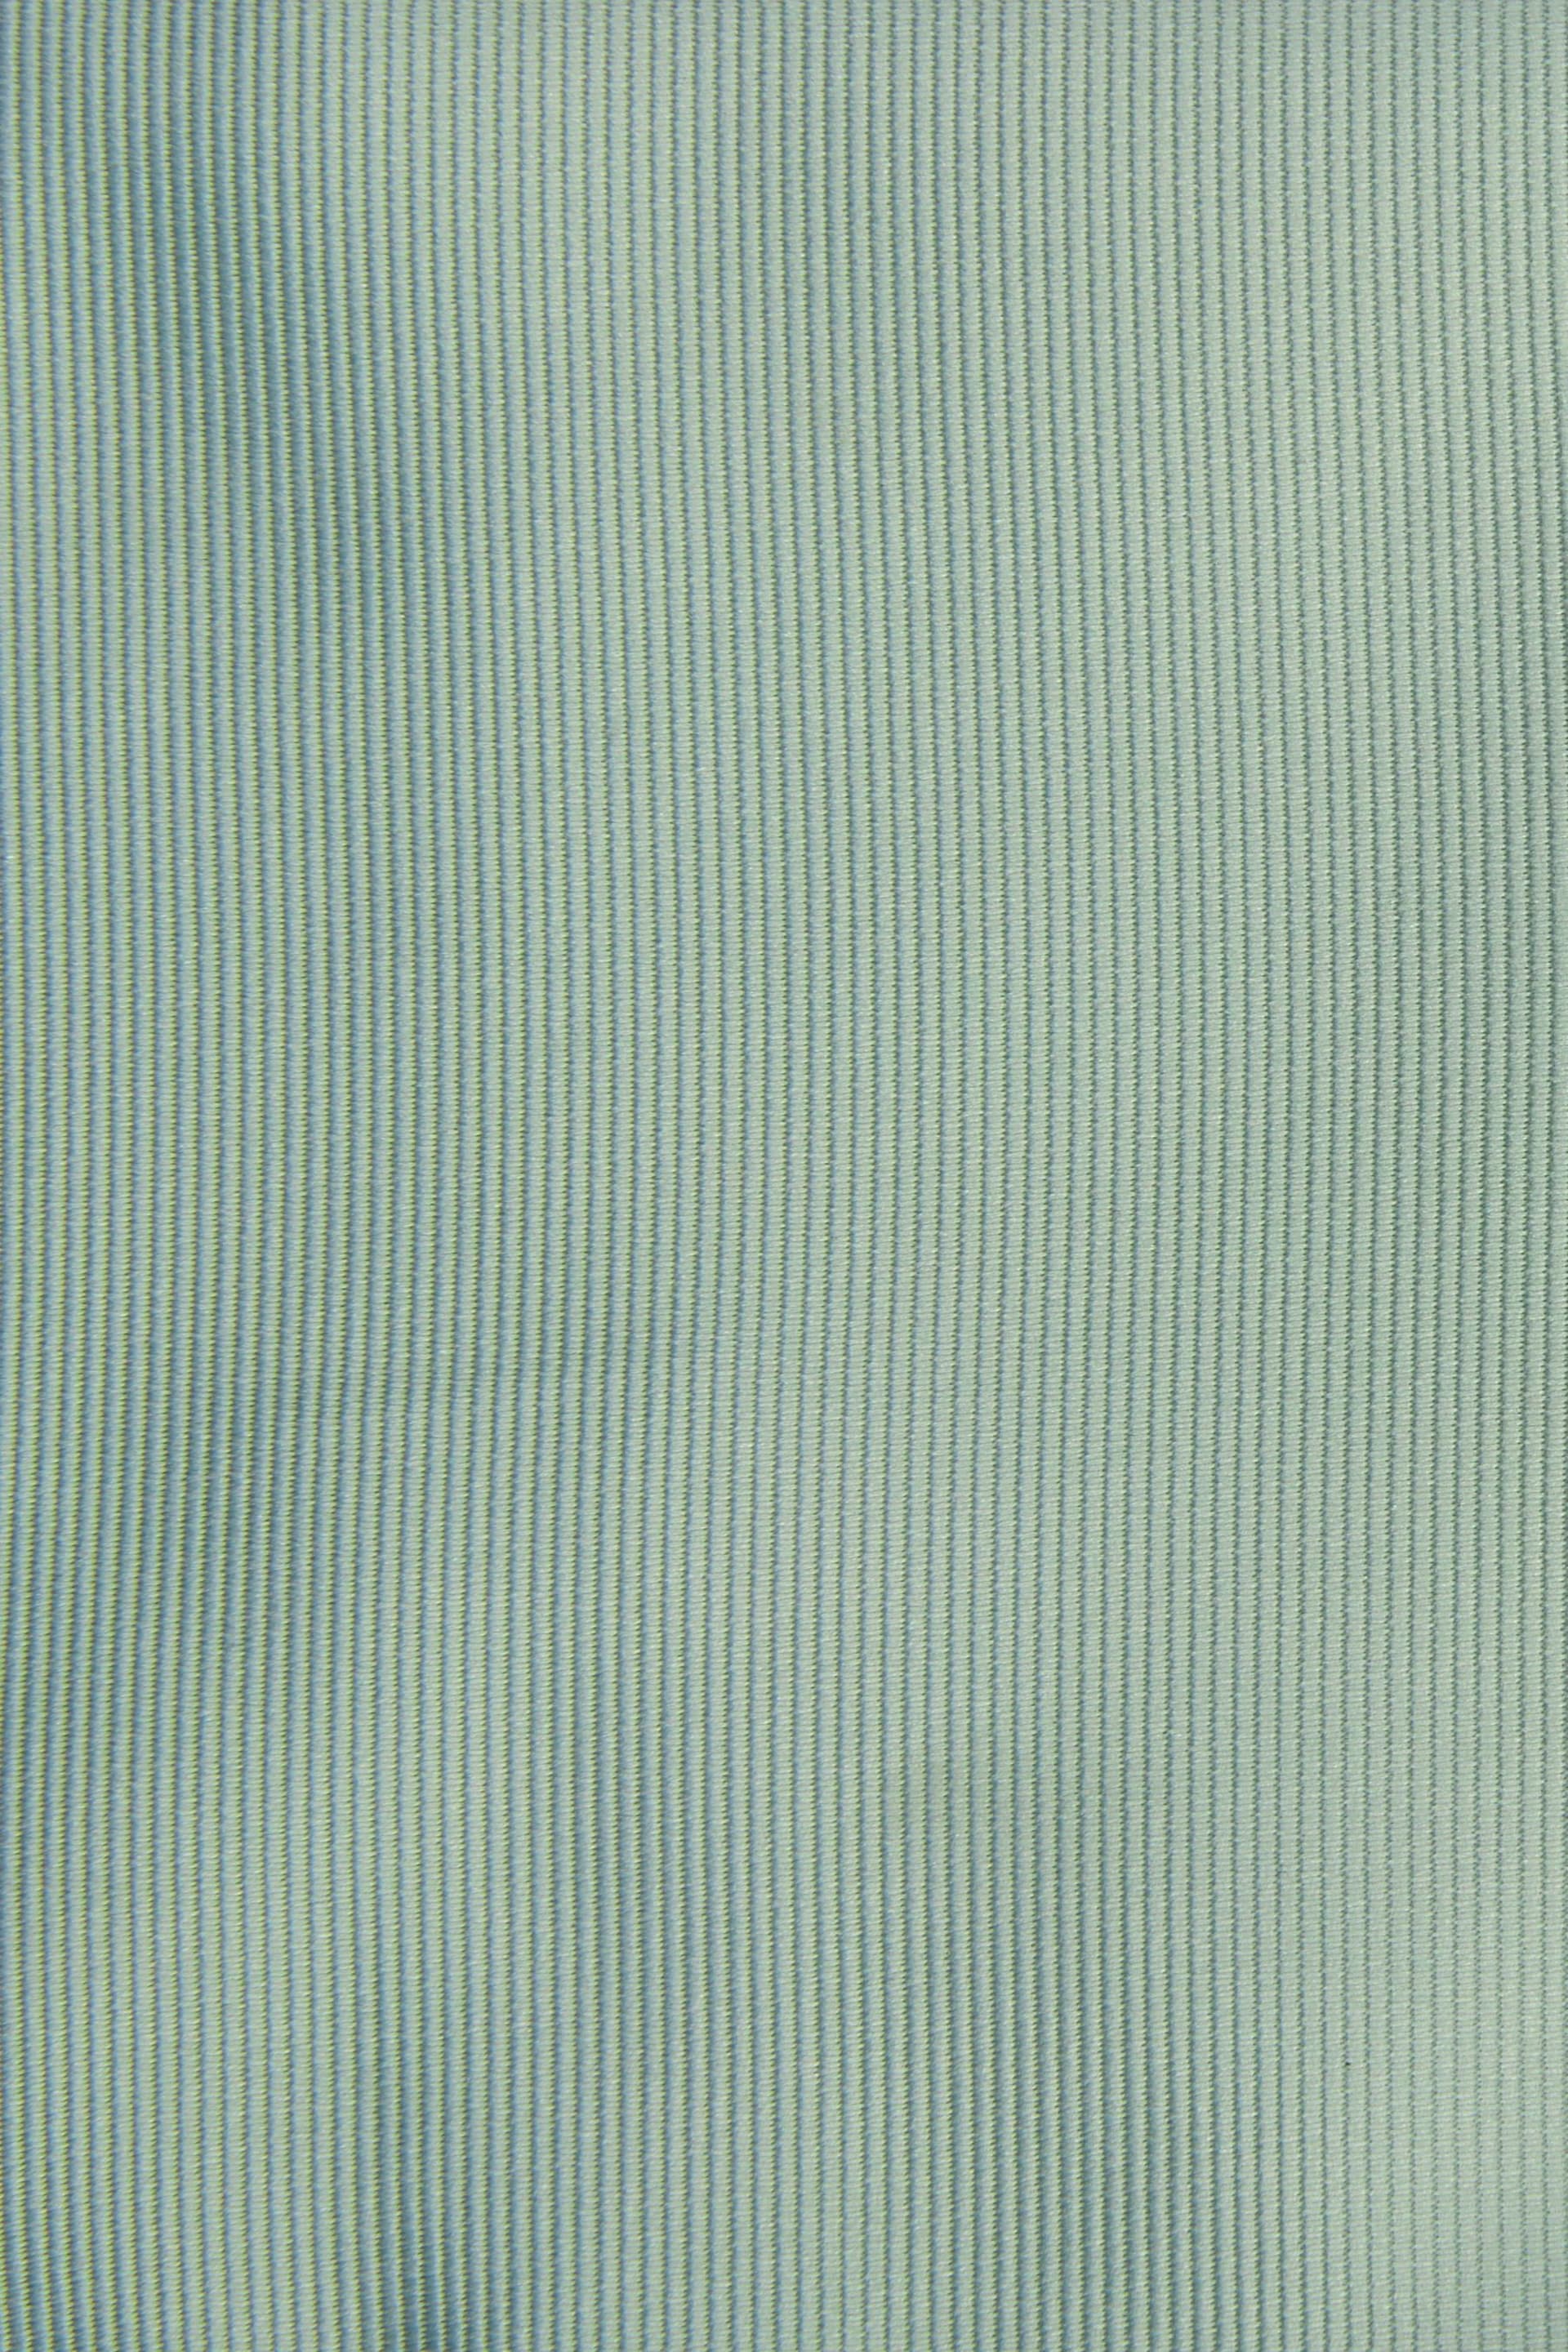 Sage Green Recycled Polyester Twill Pocket Square - Image 2 of 2